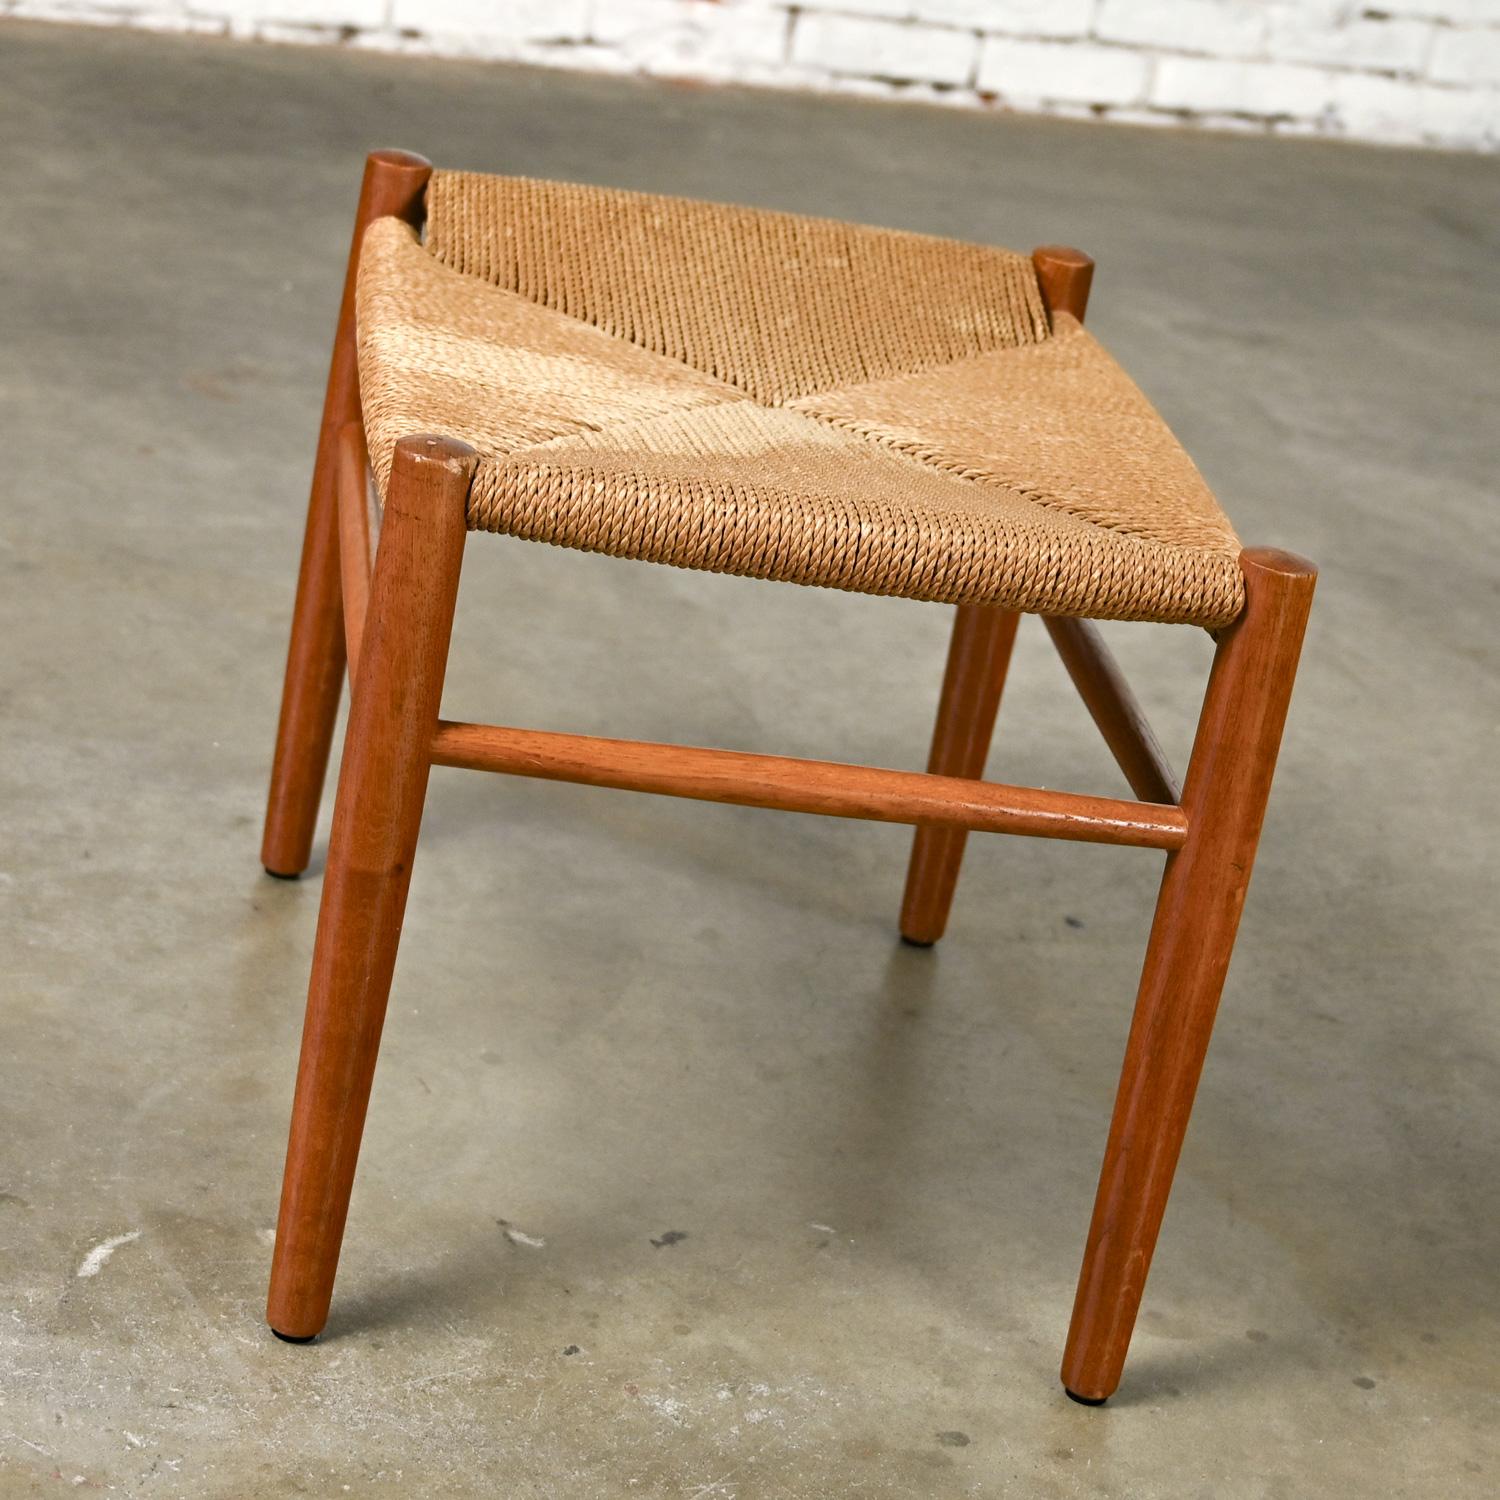 Mid-20th Century Scandinavian Modern Low Stool Teak with Natural Paper Cord Seat In Good Condition In Topeka, KS